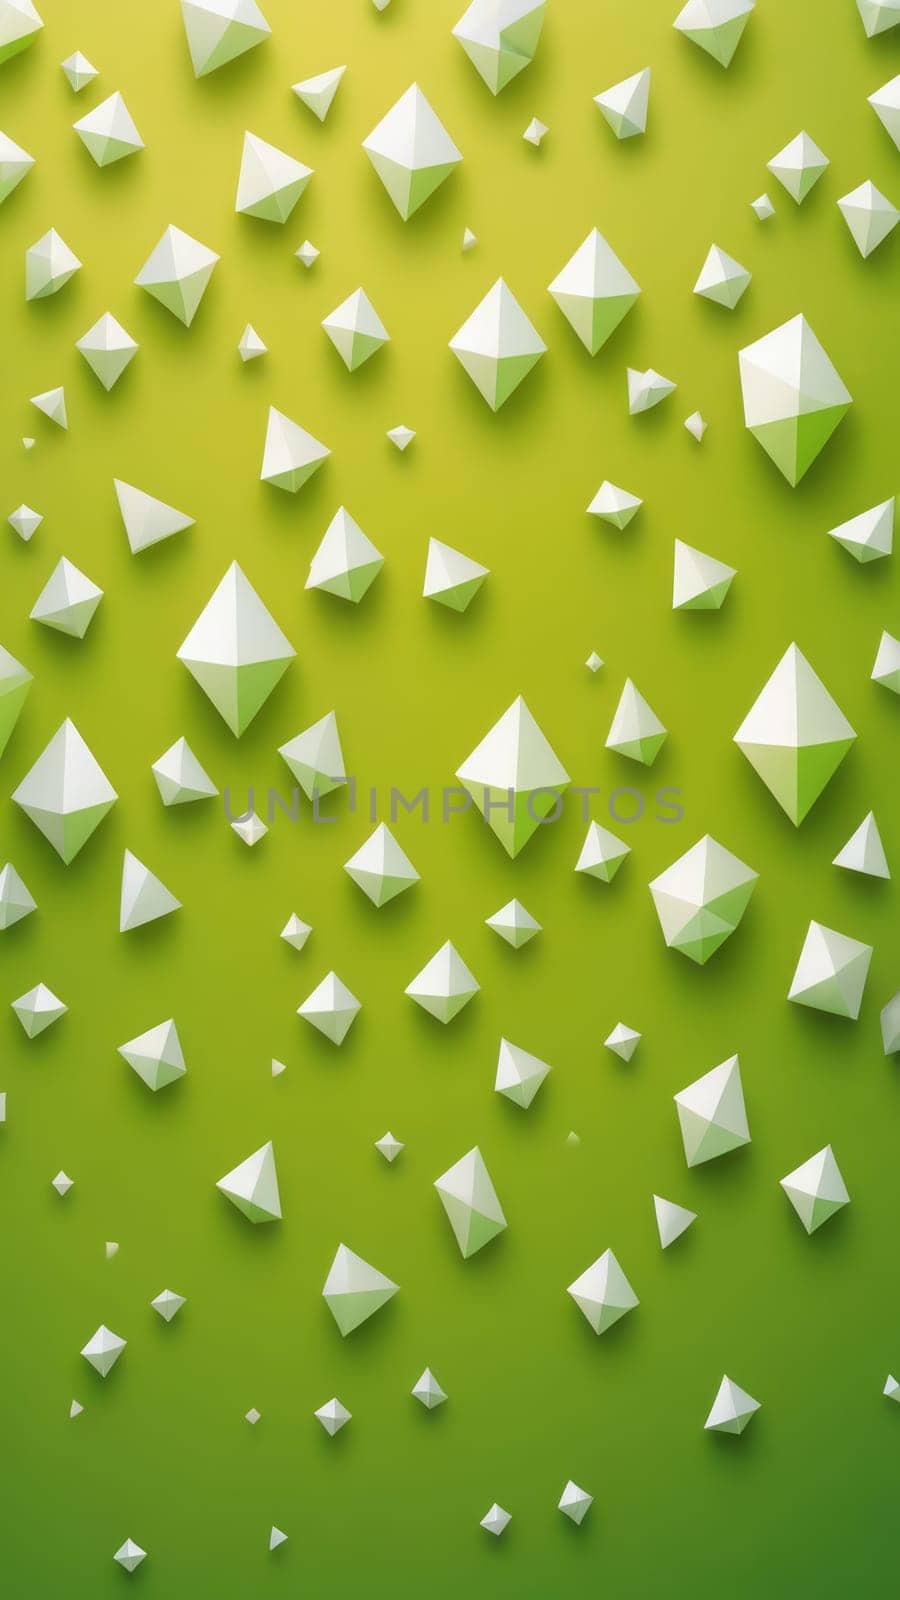 Creativity in paints from Diamond shapes and lime by nkotlyar